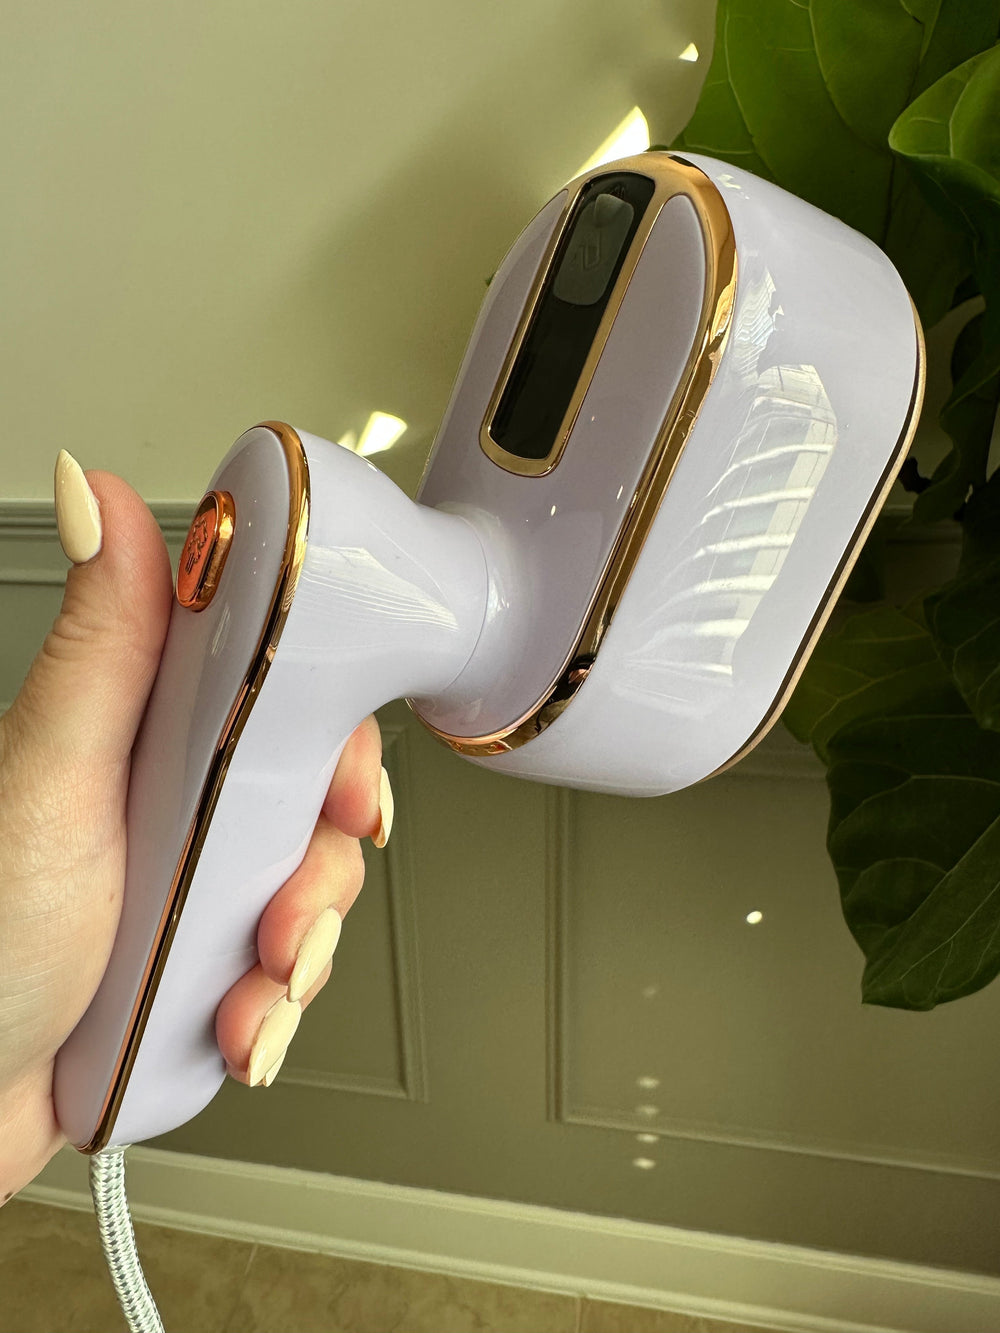 Womens - PREORDER: Handheld Travel Steamer In Two Colors